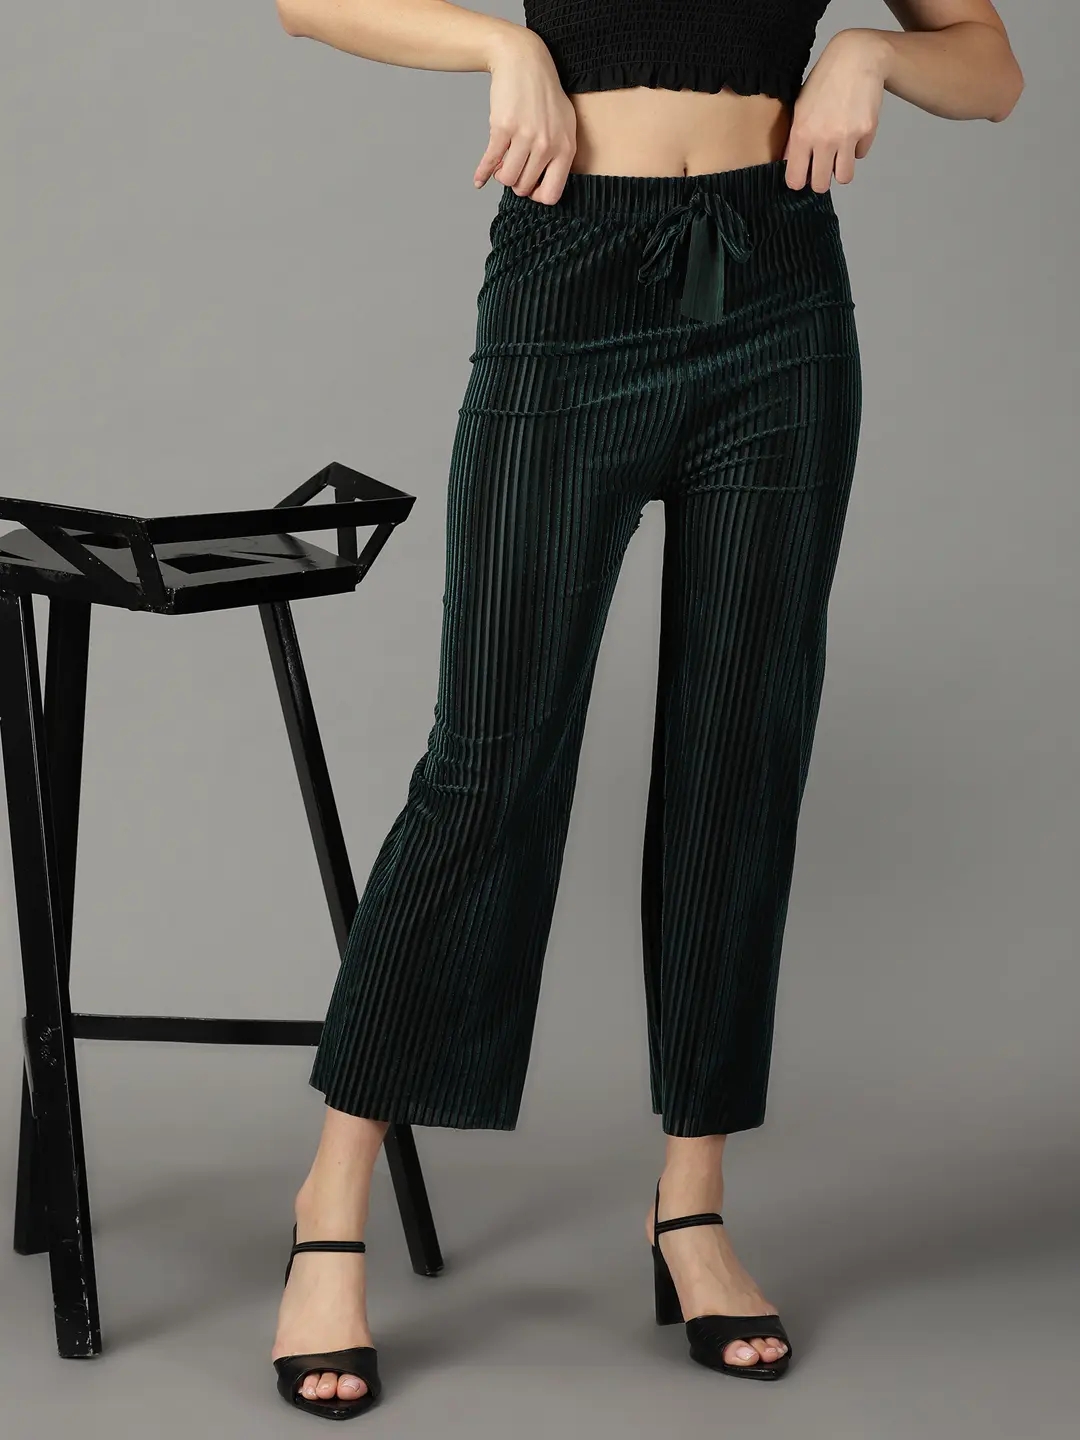 Plus-Size Pants Patterns Round-Up: The Most Comprehensive List You've Ever  Seen!